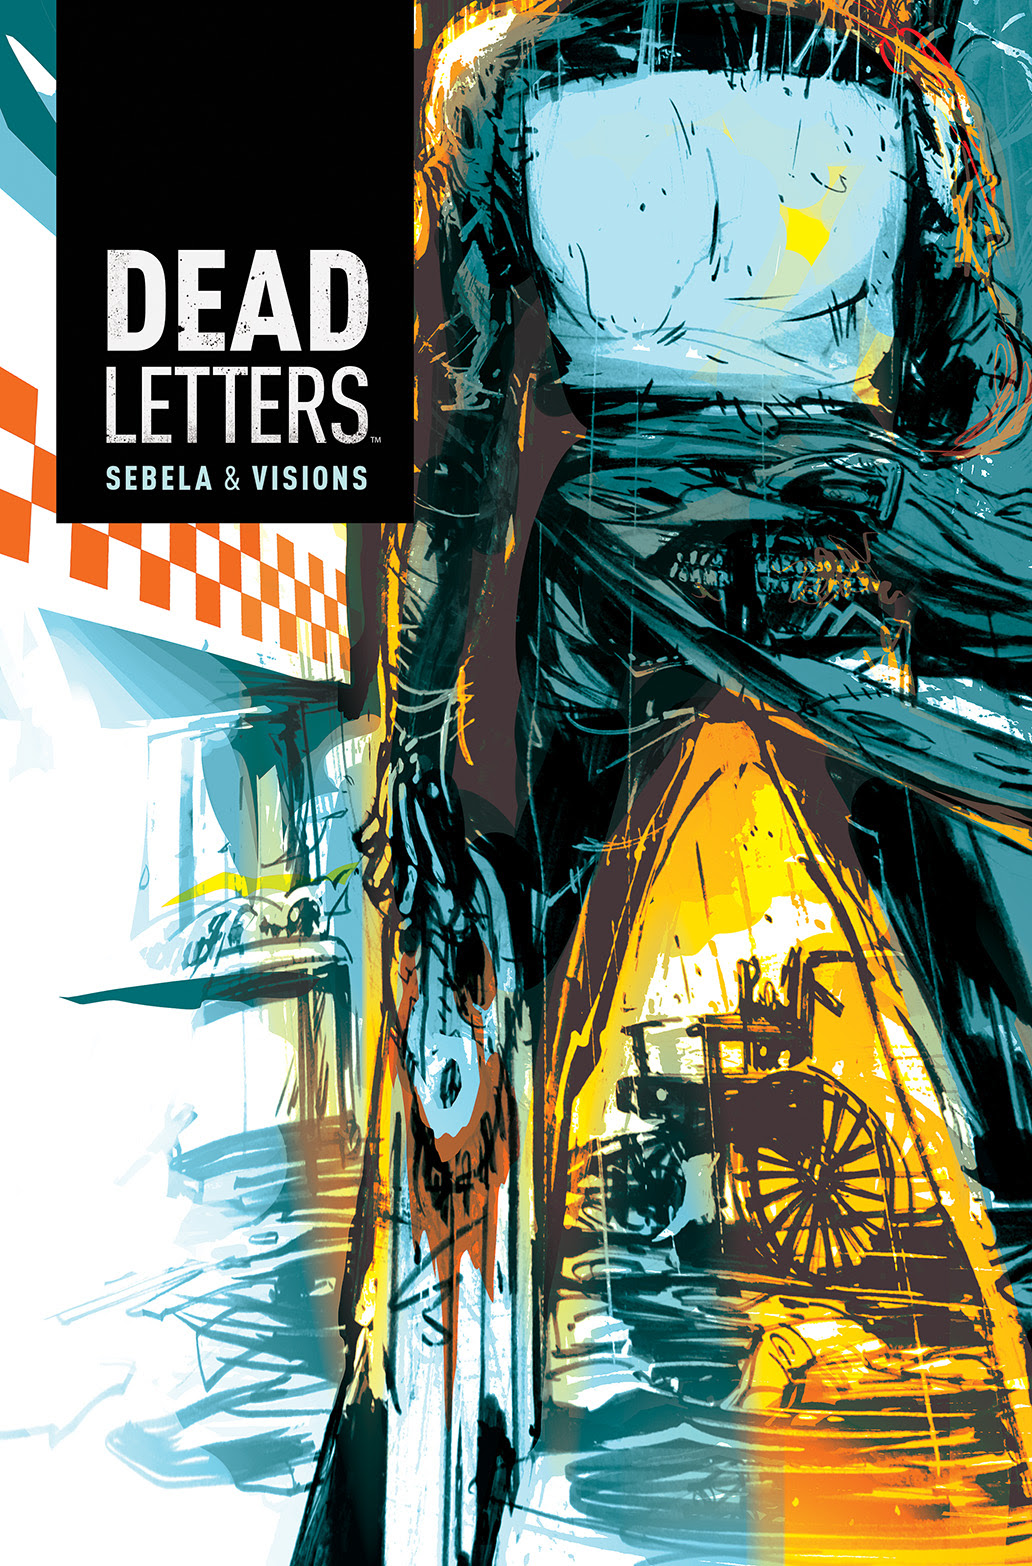 DEAD LETTERS #5 Cover by Chris Visions